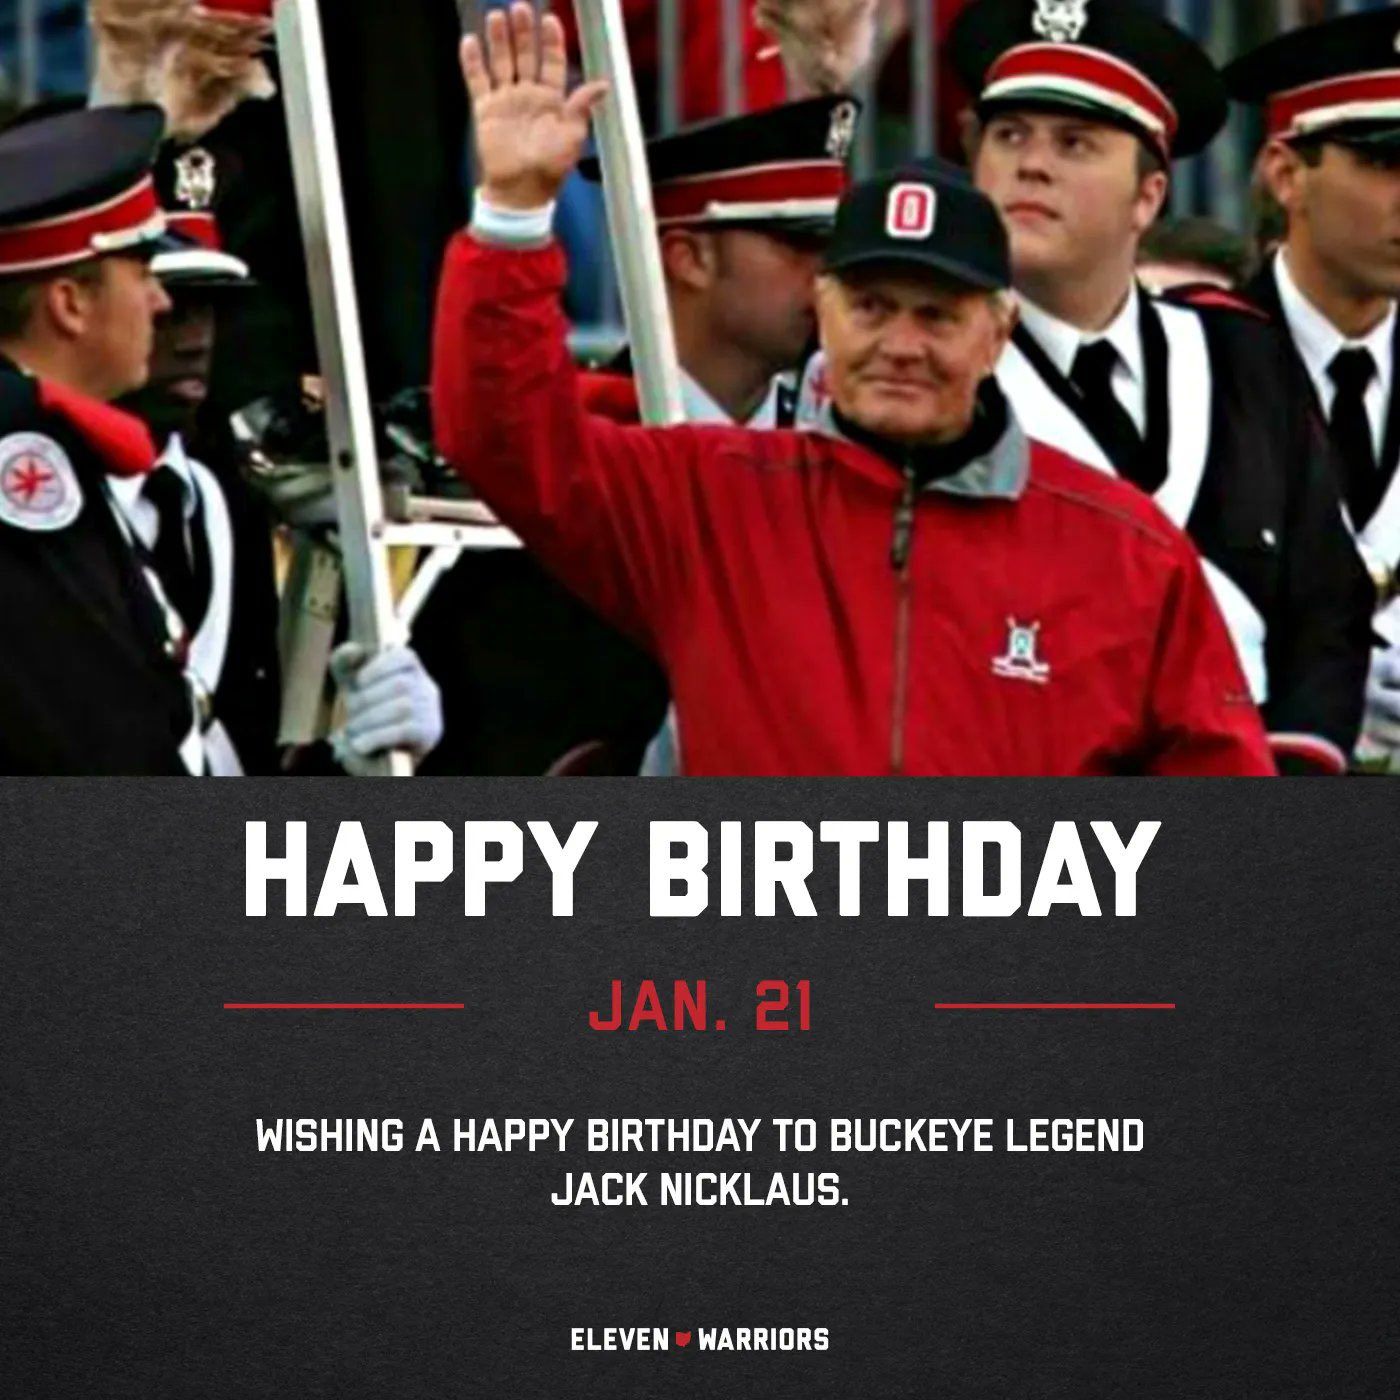  Happy Birthday to the greatest golfer ever and Buckeye Legend, The Goat Jack Nicklaus ! 